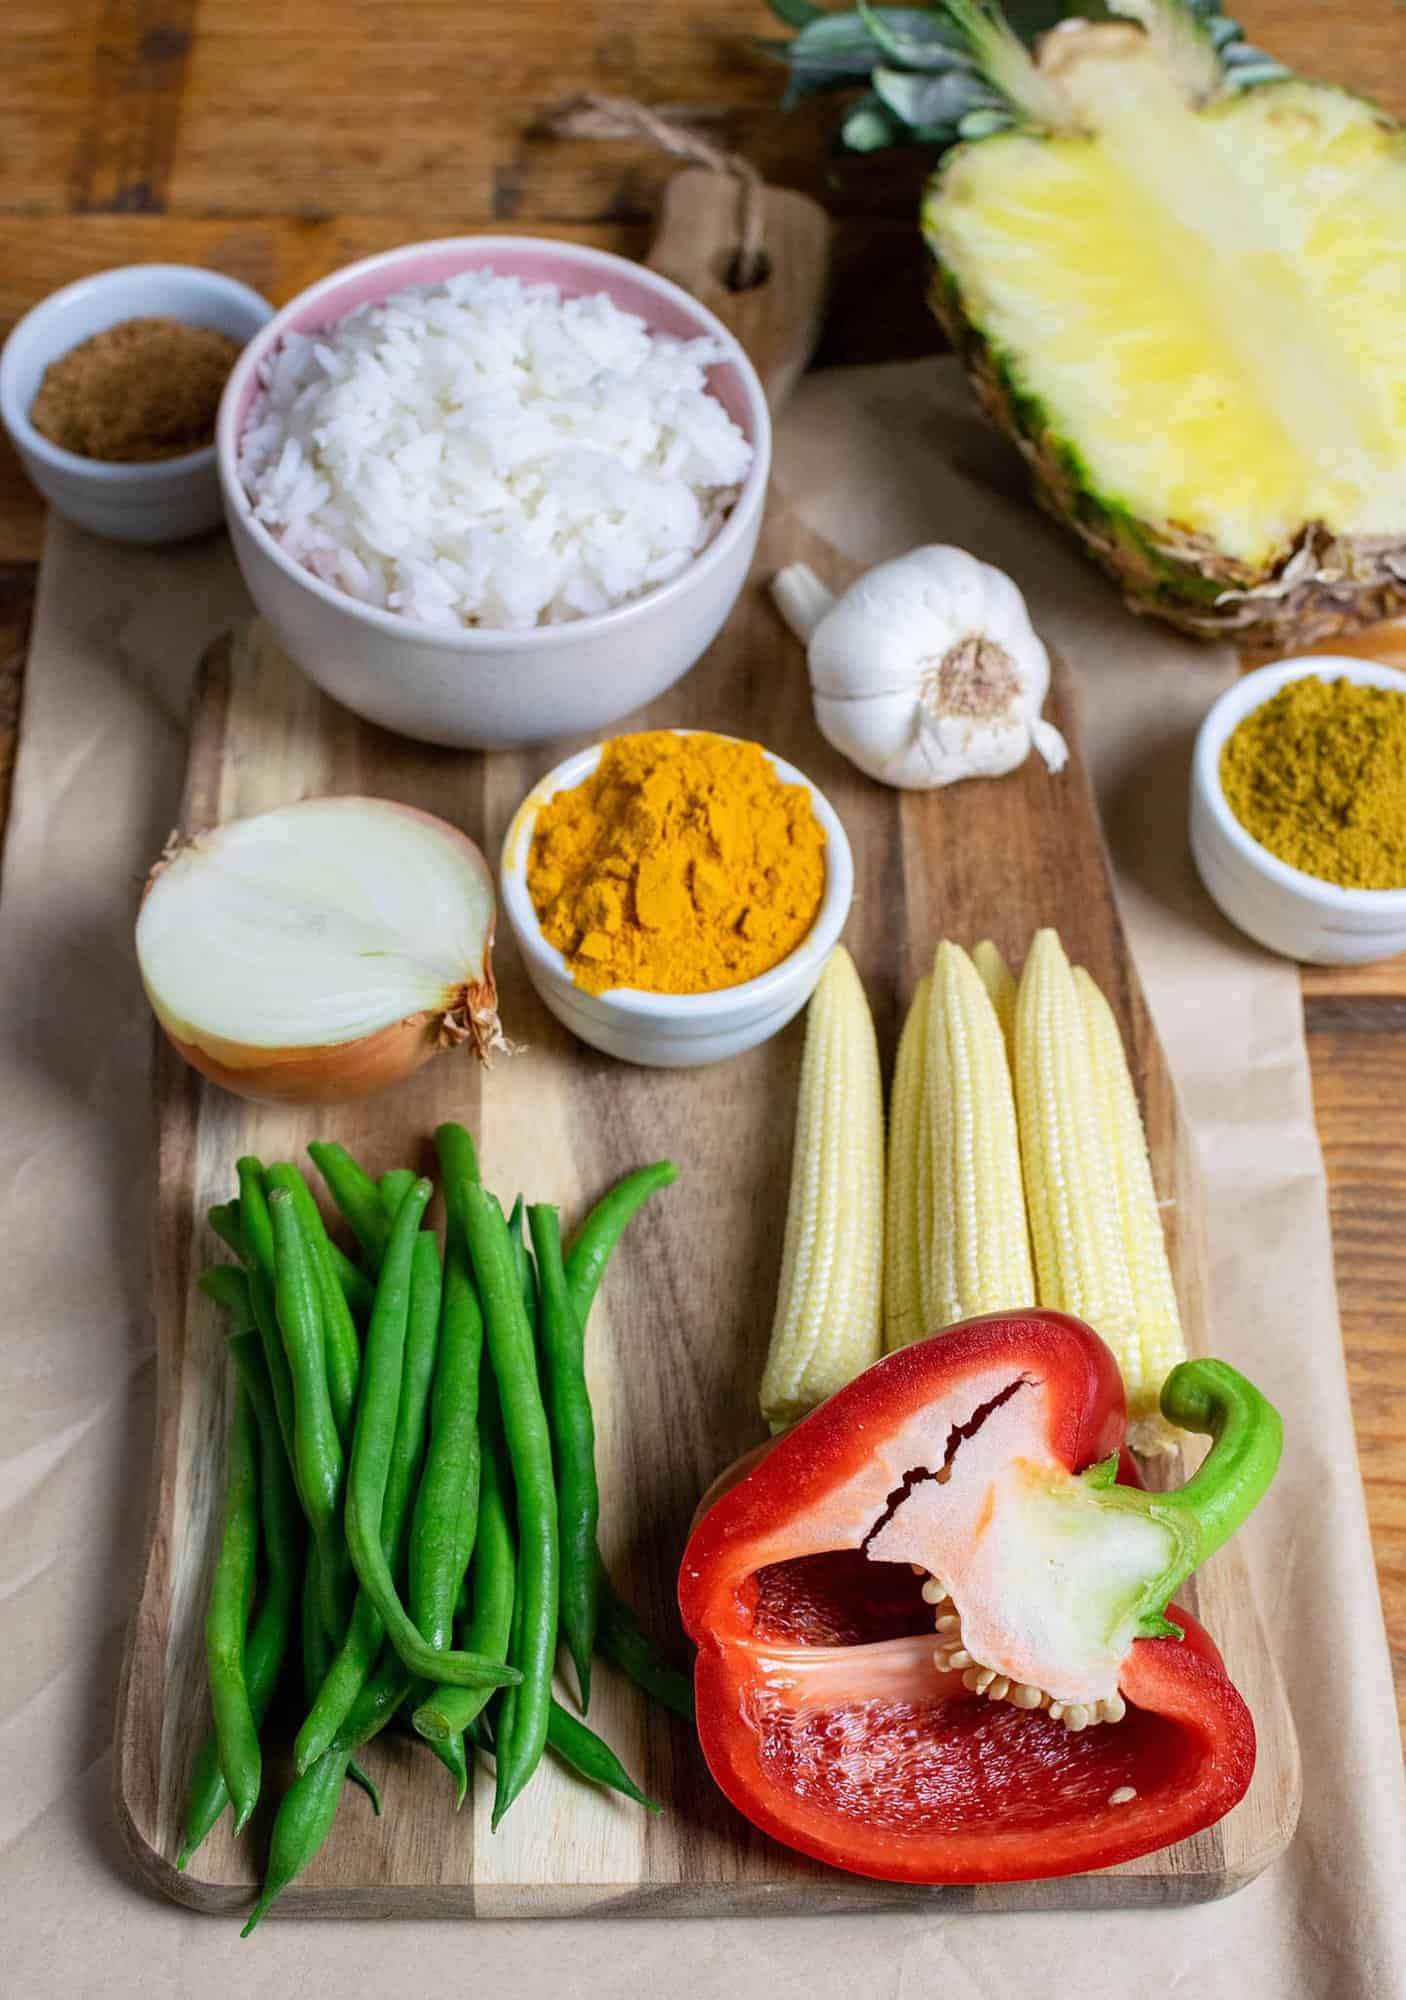 A load of ingredients including rice, veggies, turmeric and garlic laid out on a chopping board.